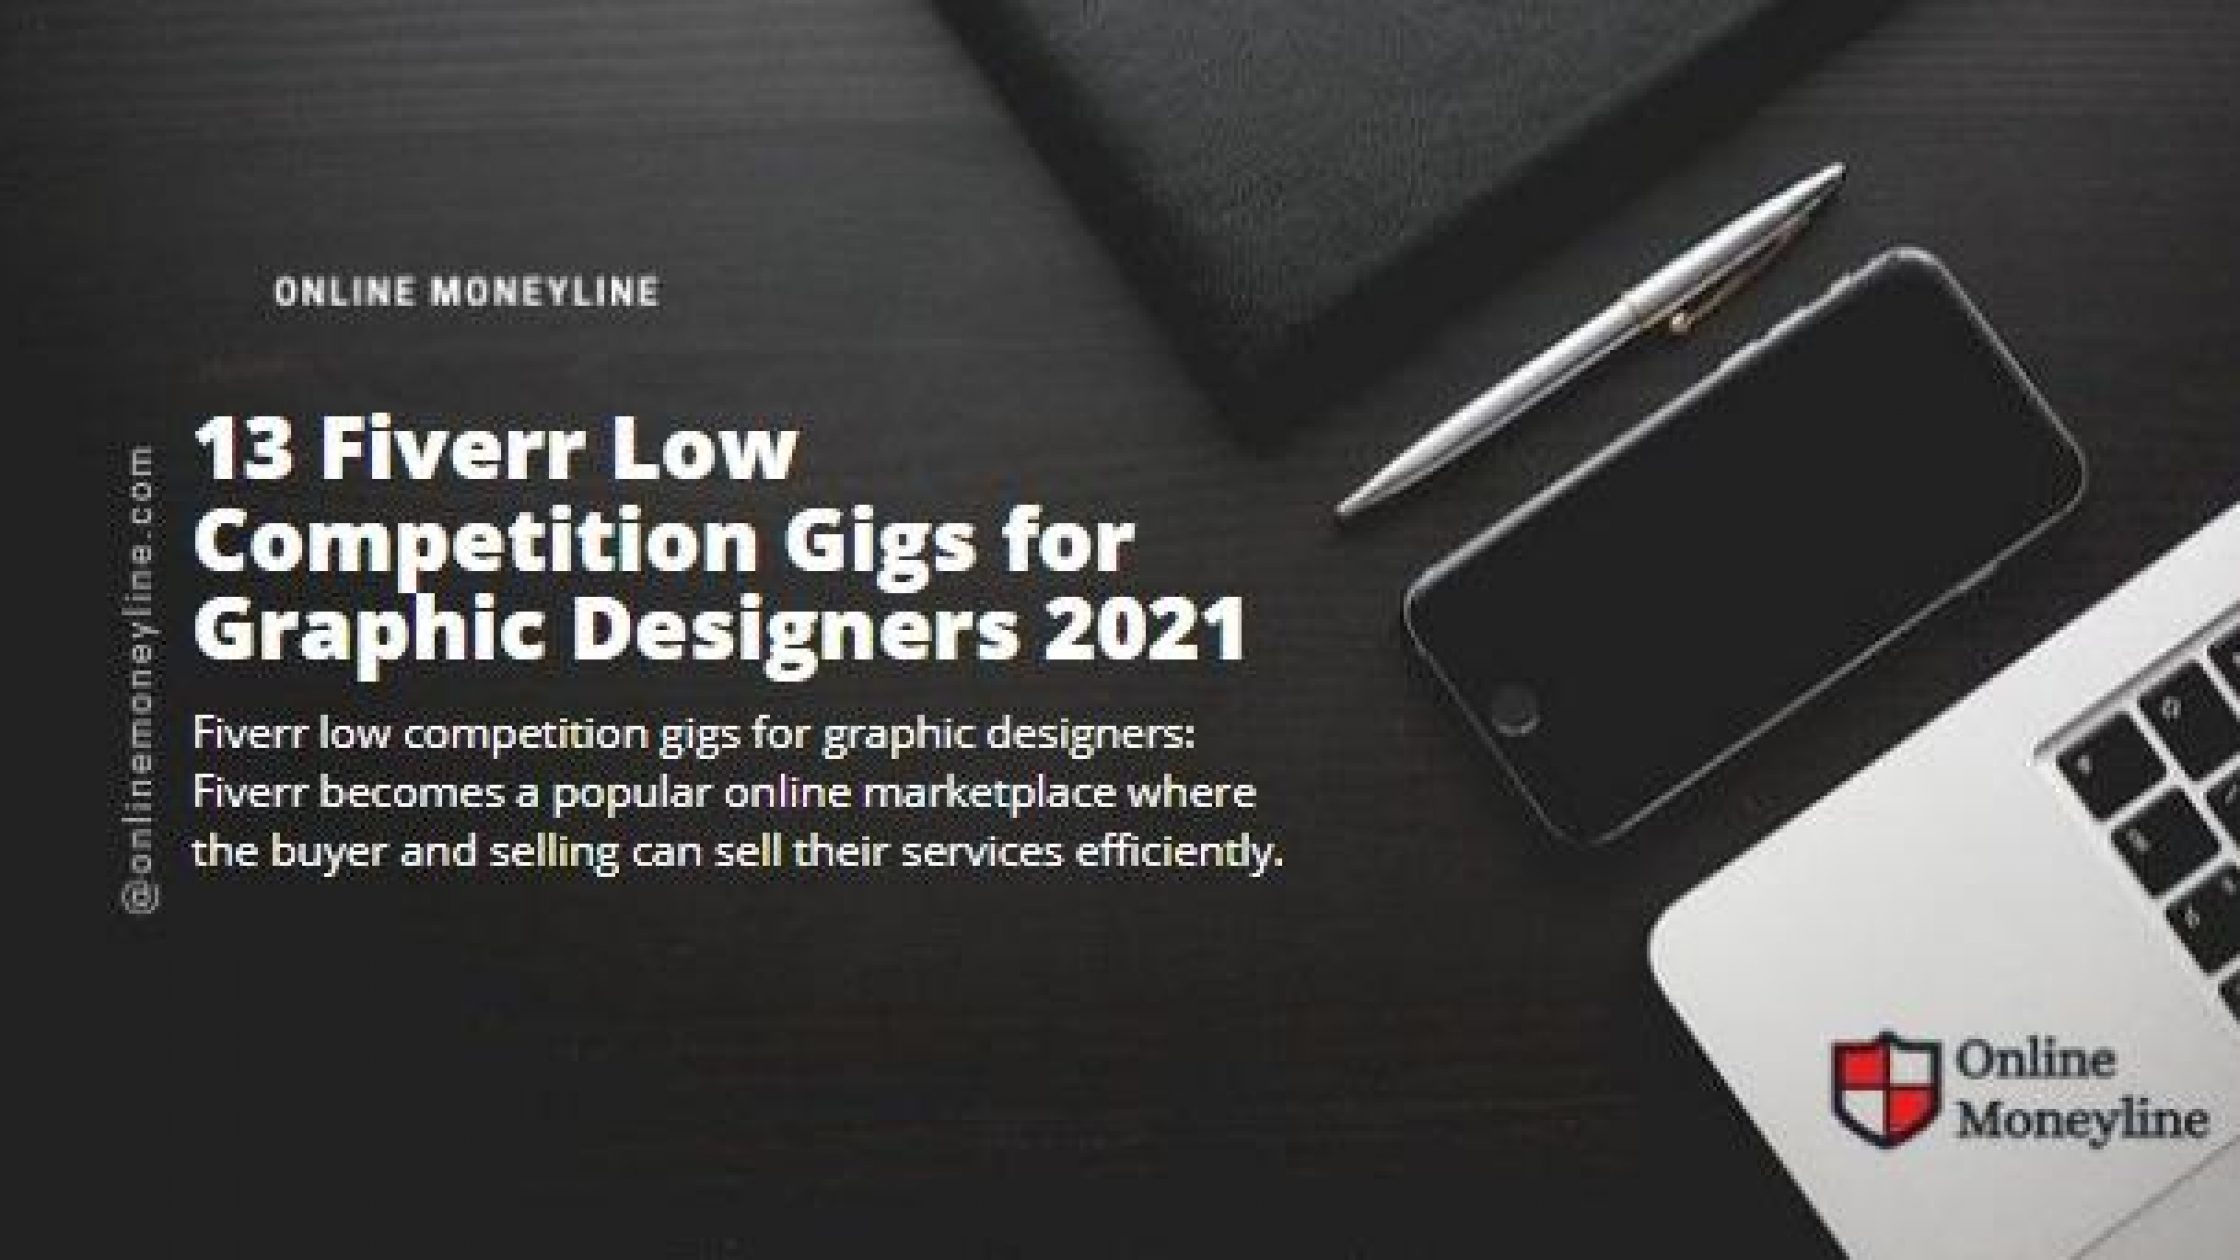 13 Fiverr Low Competition Gigs for Graphic Designers 2021